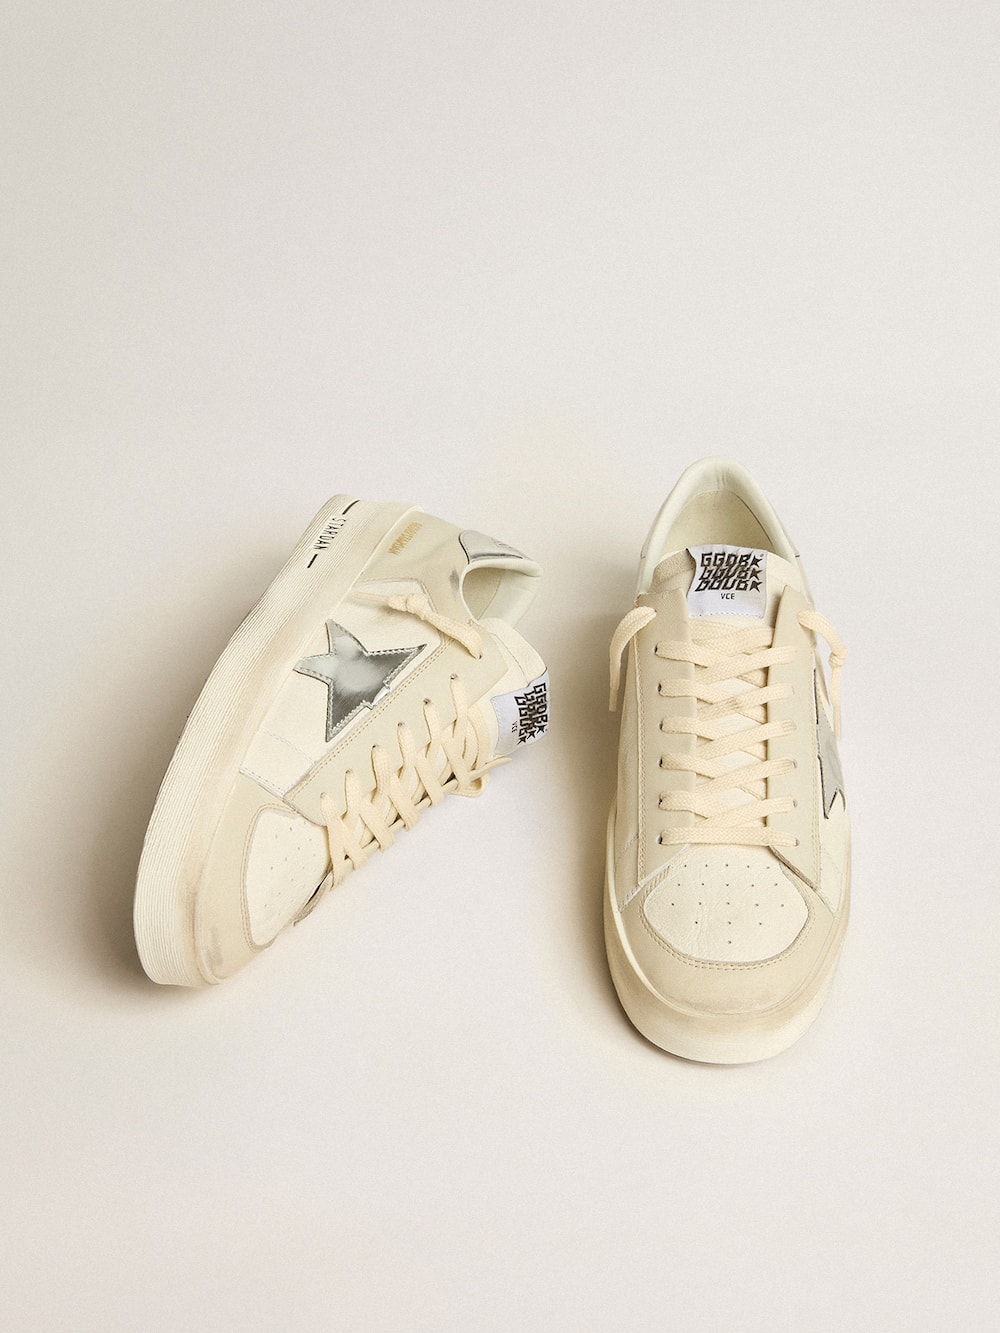 Golden Goose - Men's Stardan in nappa leather with silver mirror-effect star and heel tab in 